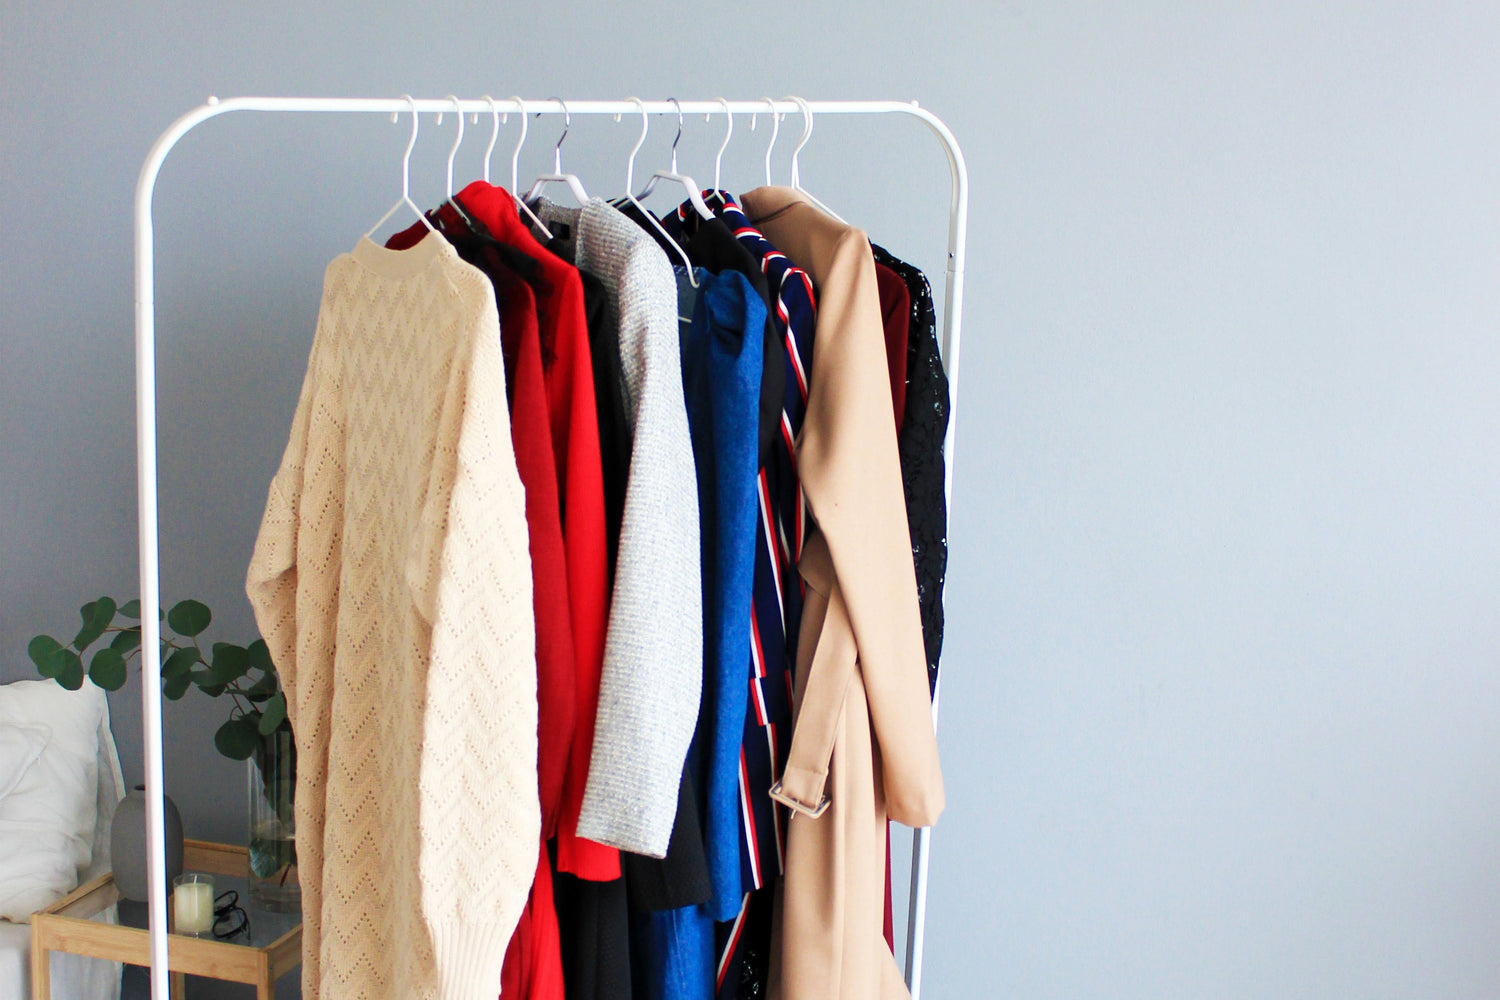 The Clothes Rack